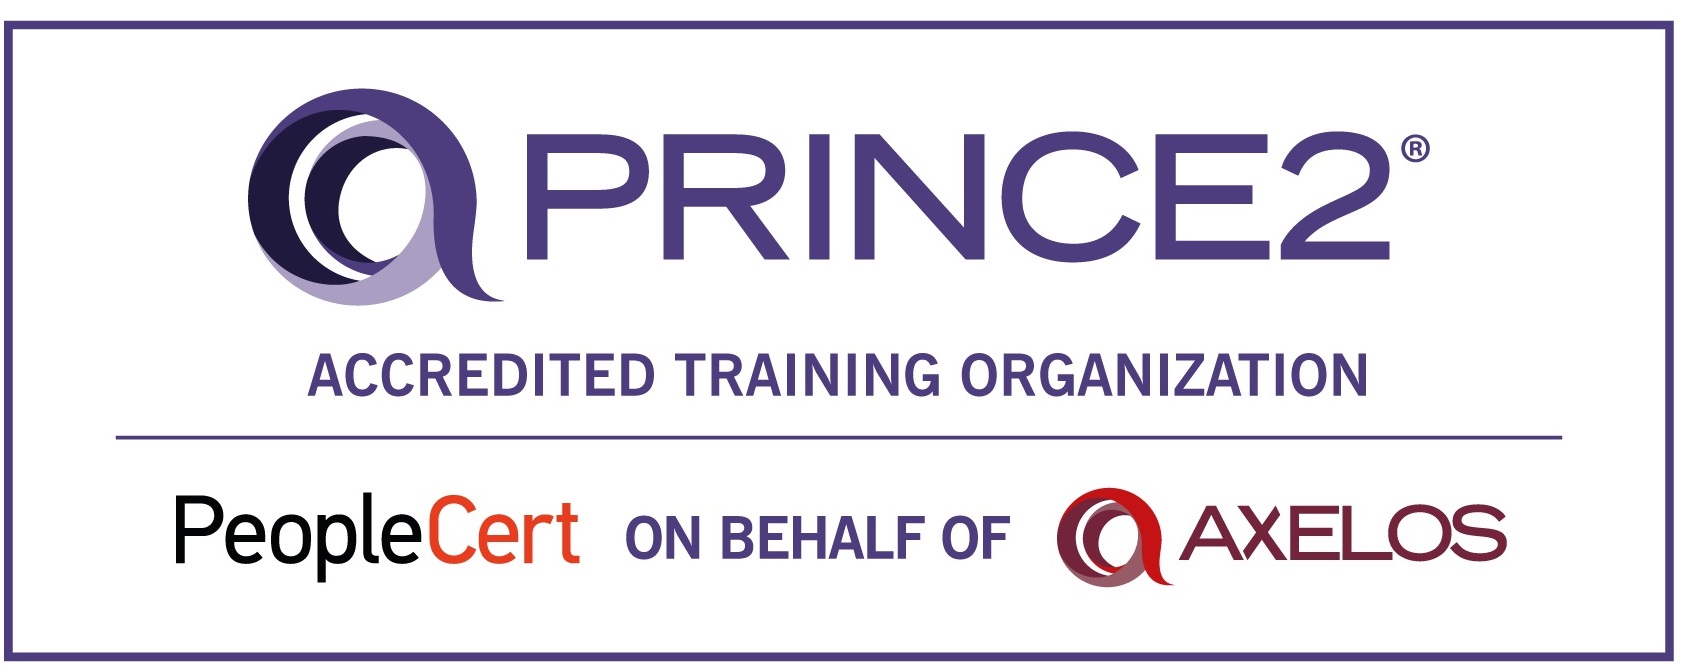 PRINCE2 bei Astroth Training